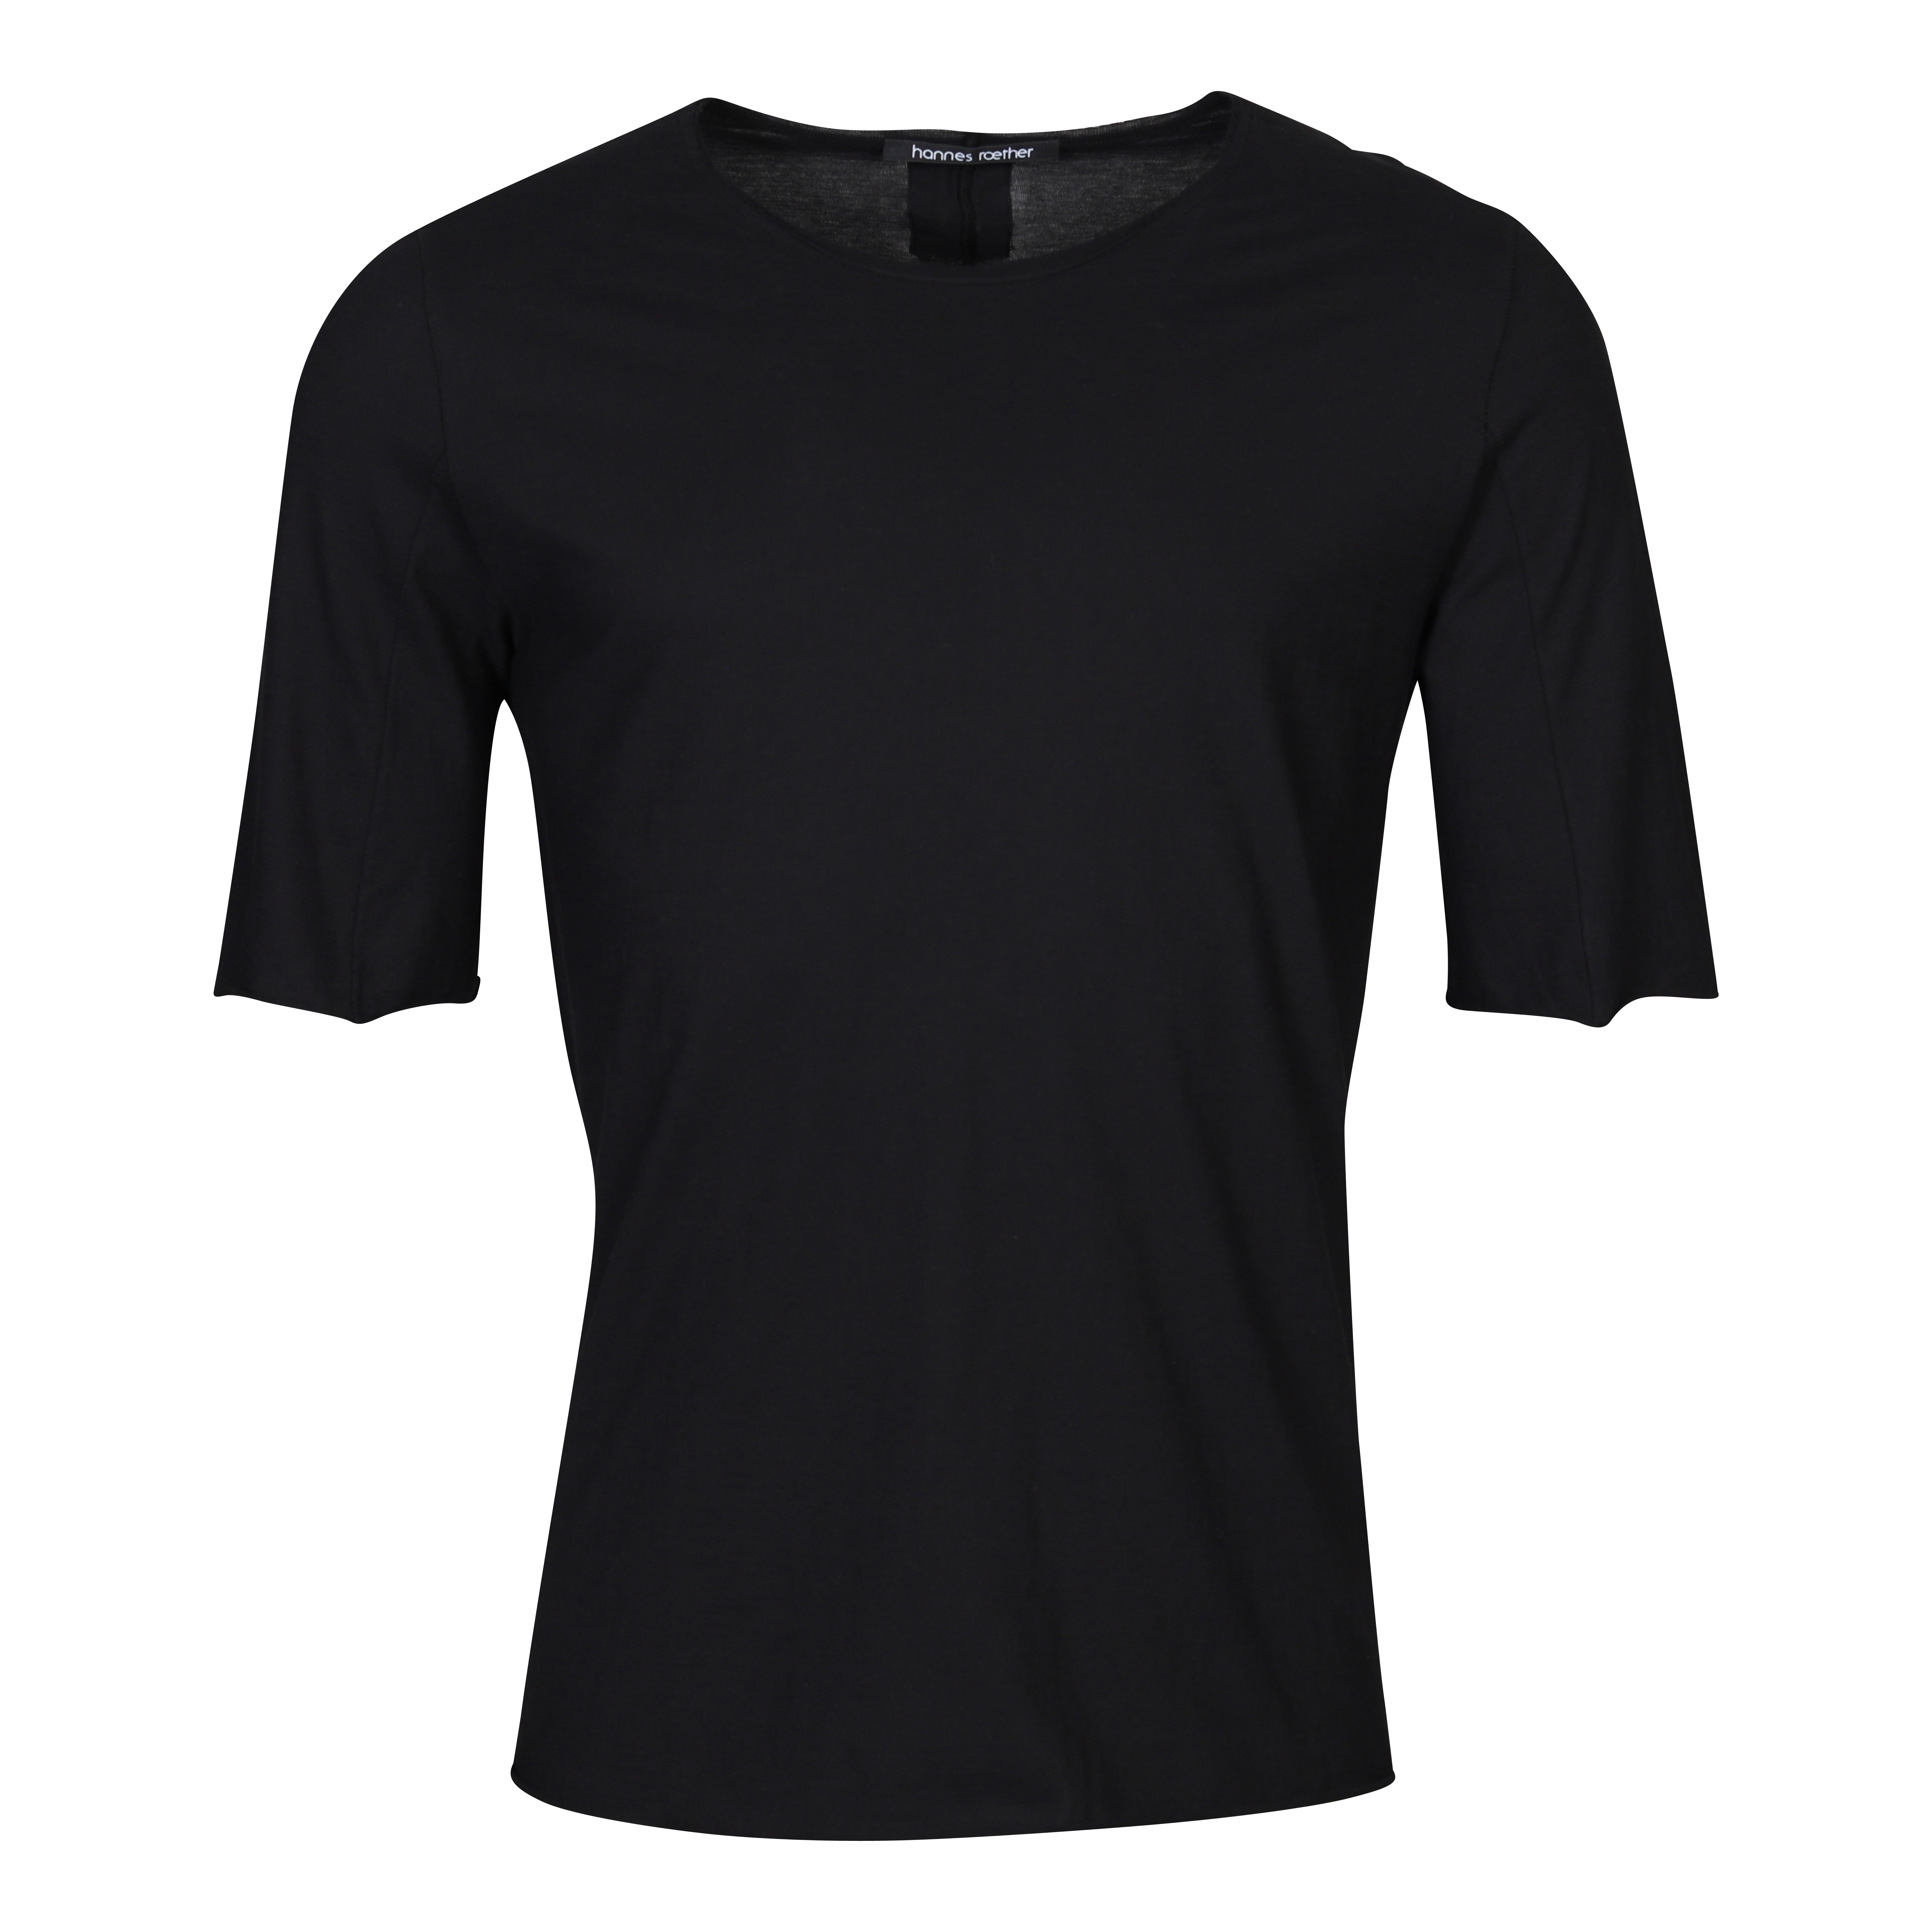 Hannes Roether Crewneck T-Shirt in Black S